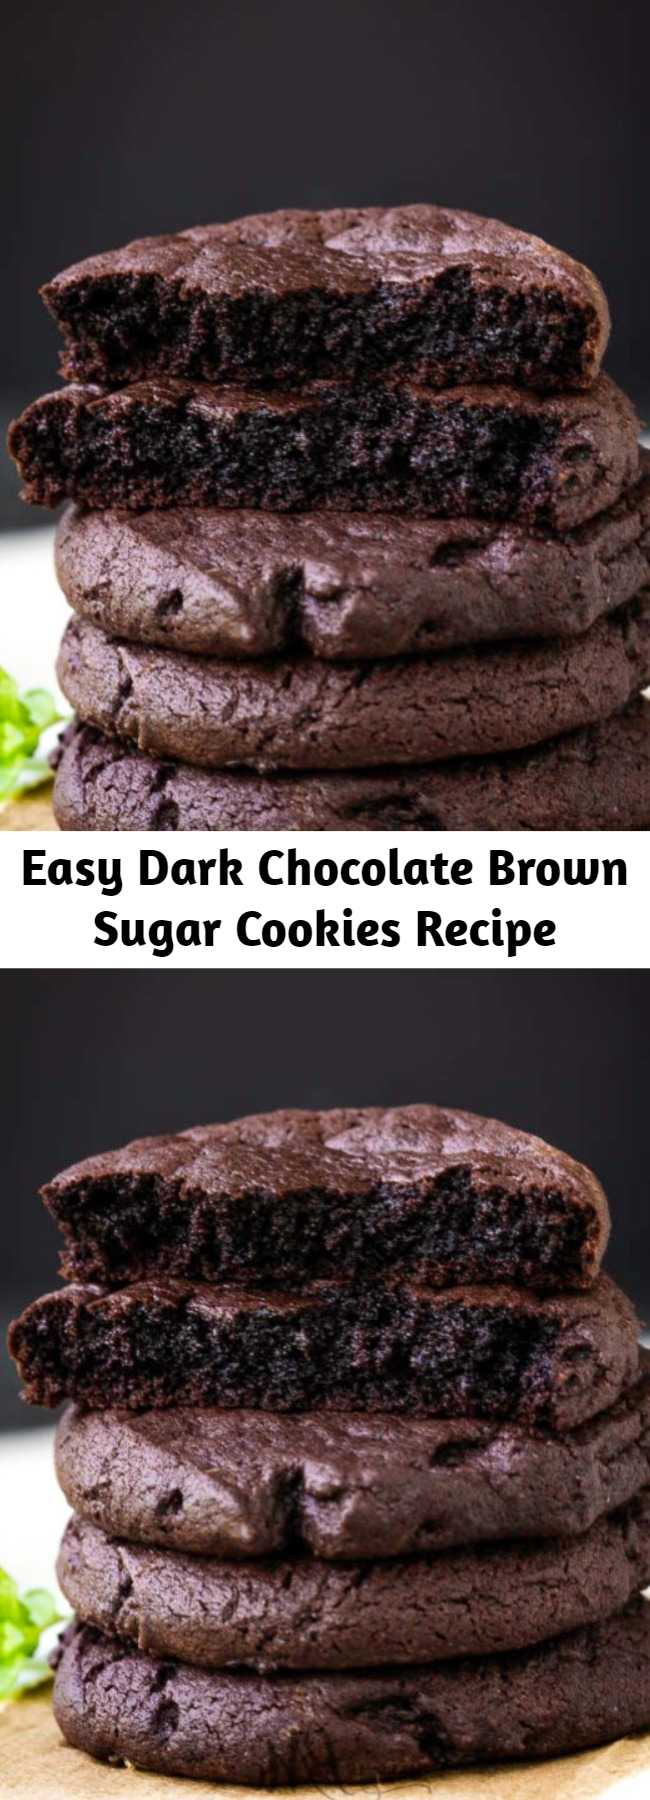 Easy Dark Chocolate Brown Sugar Cookies Recipe - Dark Chocolate Brown Sugar Cookies have the perfect chewy texture on the inside with just a bit of crisp on the outside. #darkchocolate #chocolate #cookies #easy #Oreo #recipes #chewy